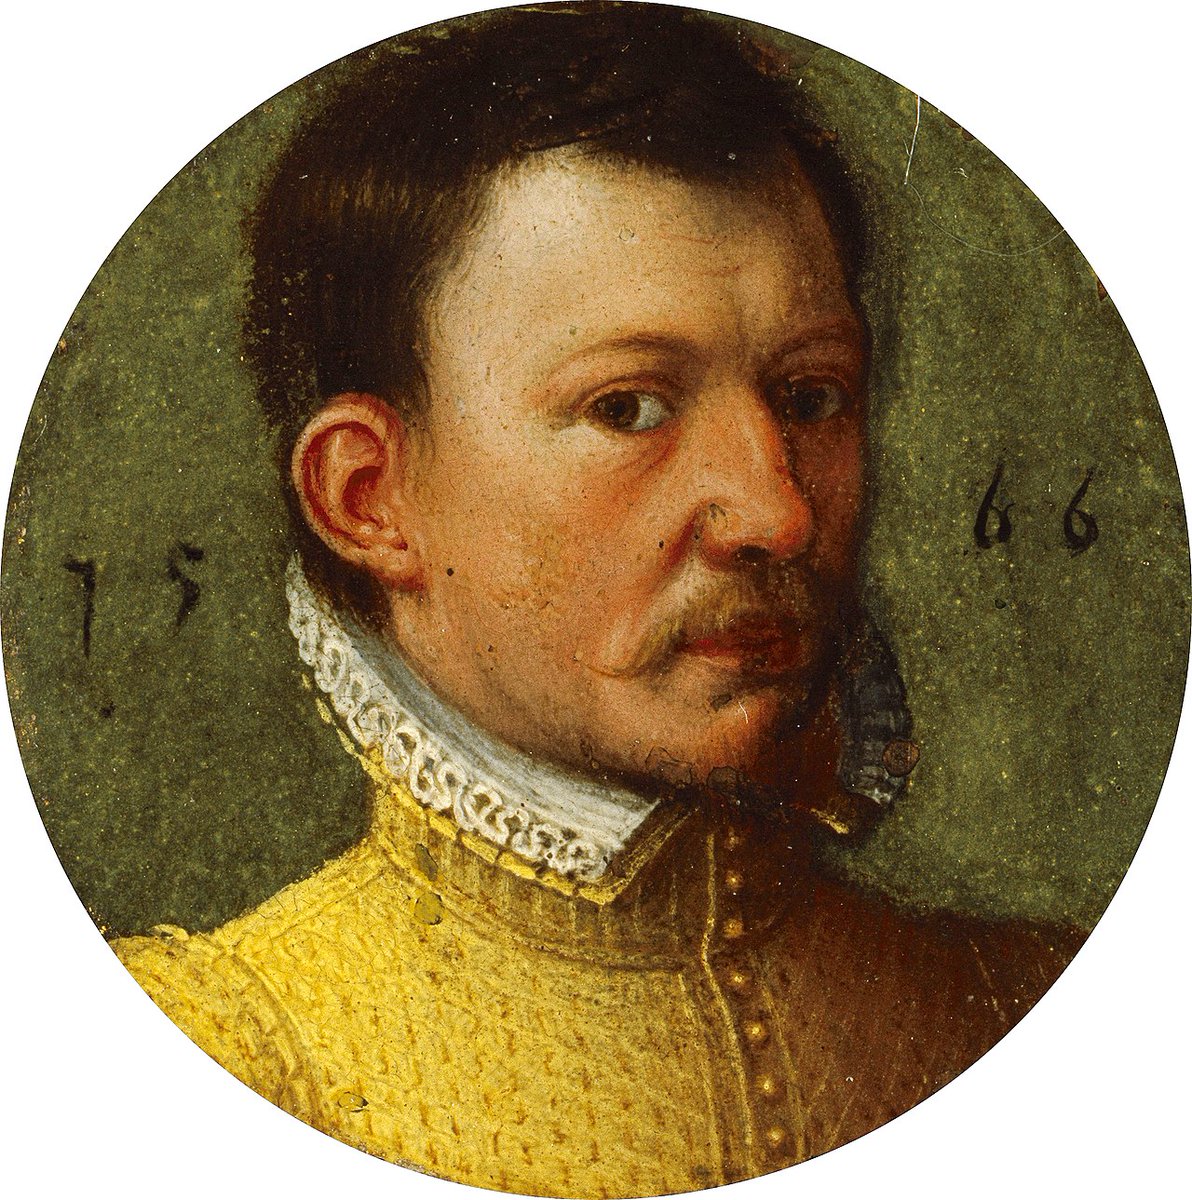 #onthisday 14 April 1578 – James Hepburn, 4th Earl of Bothwell died (b. 1534) James Hepburn, 1st Duke of Orkney & 4th Earl of Bothwell, better known simply as Lord Bothwell, was a prominent Scottish nobleman. He was known for his marriage to Mary, Queen of Scots, as her third &…